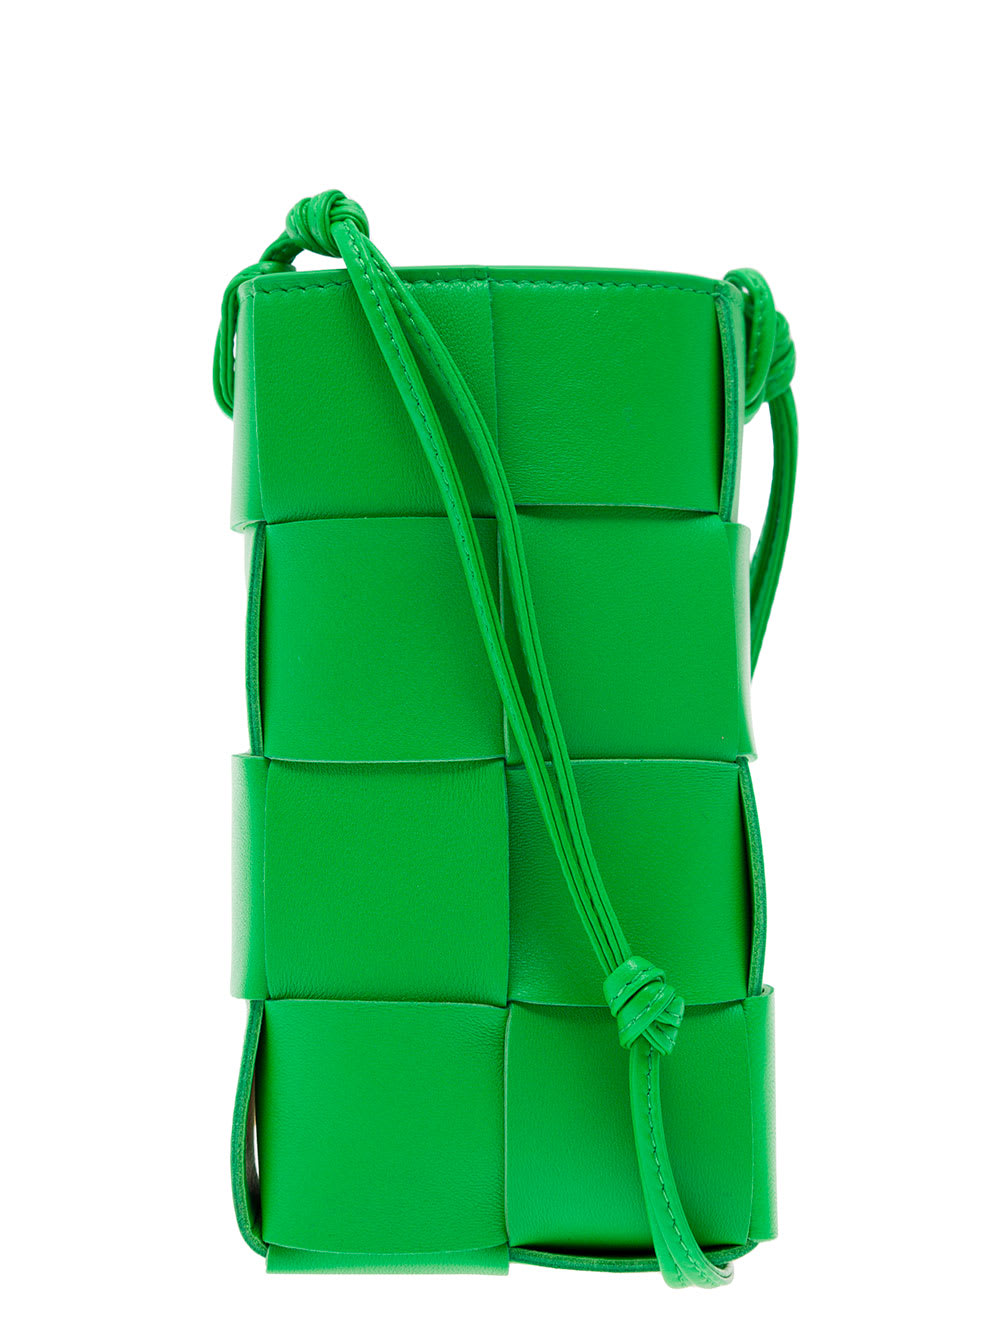 BOTTEGA VENETA PHONE POUCH GREEN SHOULDER BAG WITH KNOT DETAILS IN INTRECCIO NAPPA LEATHER WOMAN